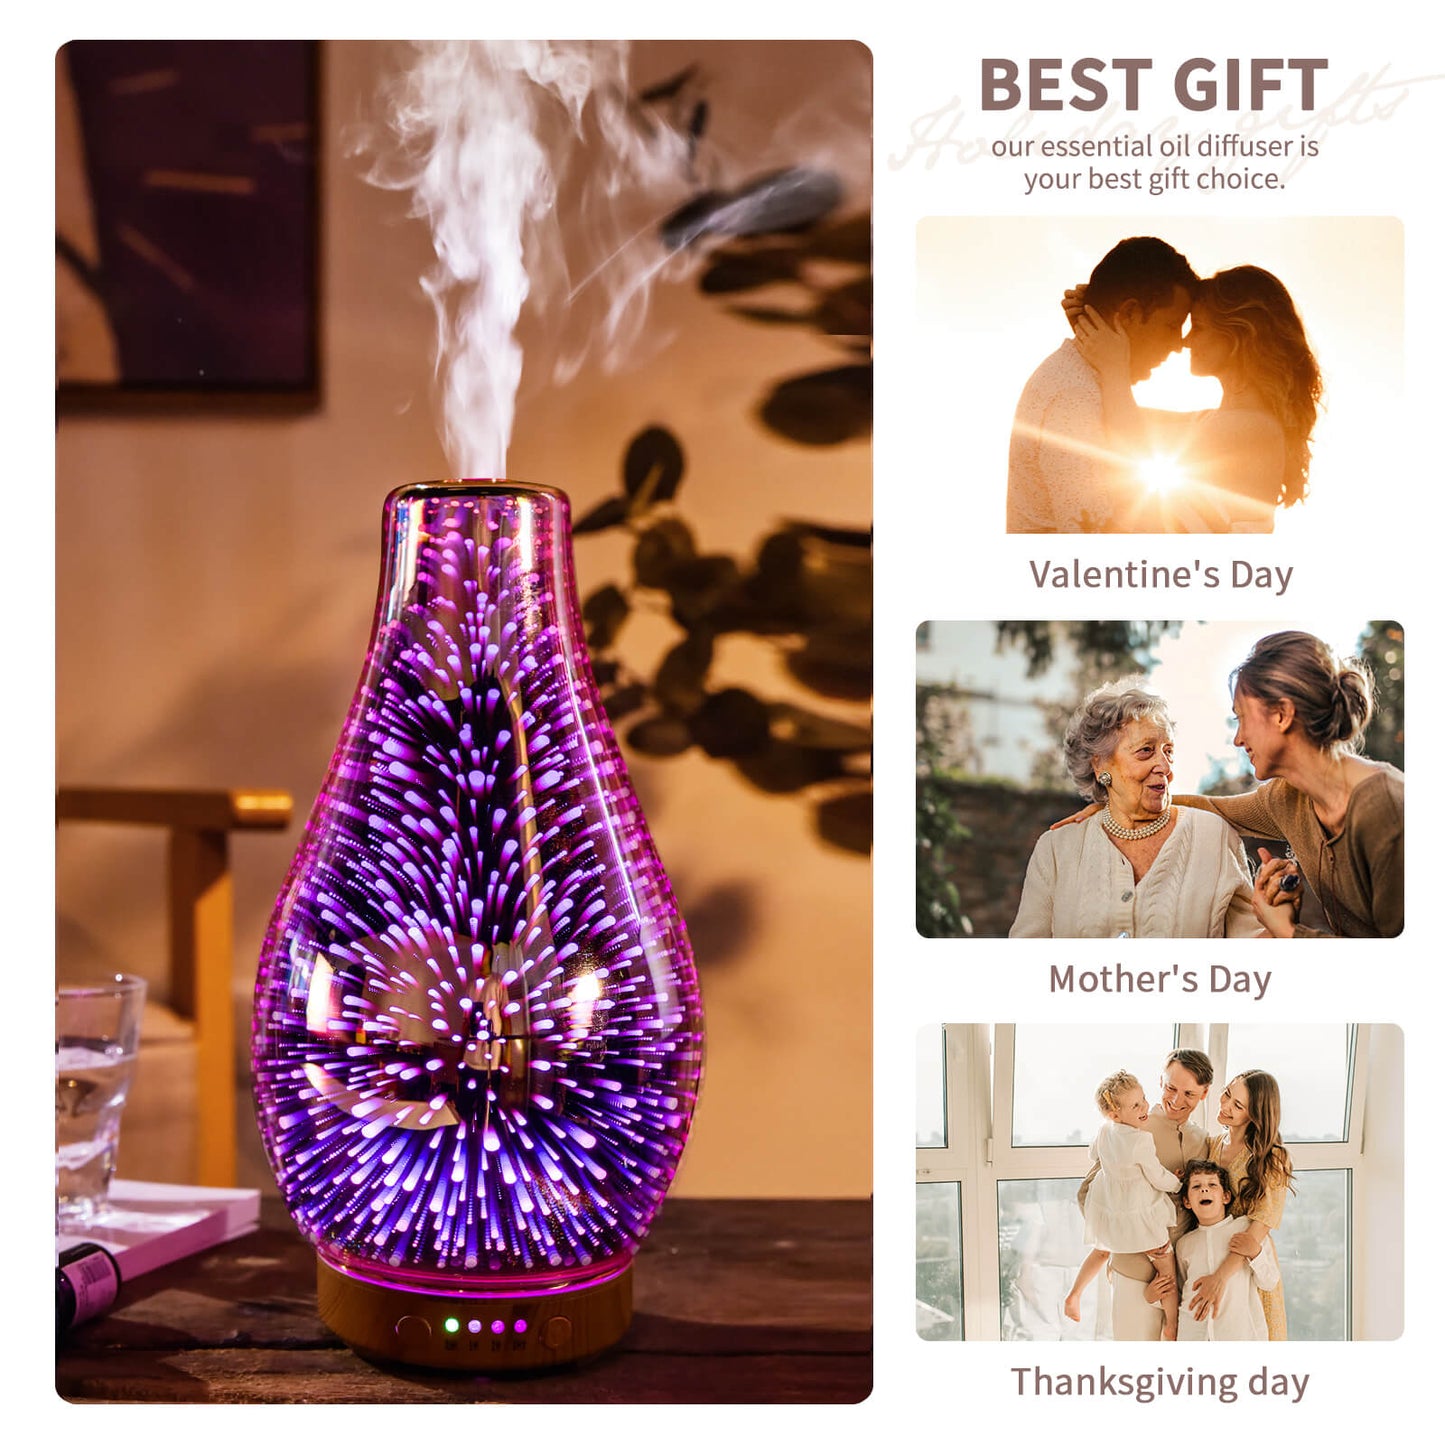 Porseme Rose Gold Essential Oil Diffuser,Aromatherapy Ultrasonic Cool Mist Humidifier, 3D Firework Effect,Waterless Auto-Off,Timer Setting,Elegant Aroma diffuser for home bedroom,study,office,yoga,spa